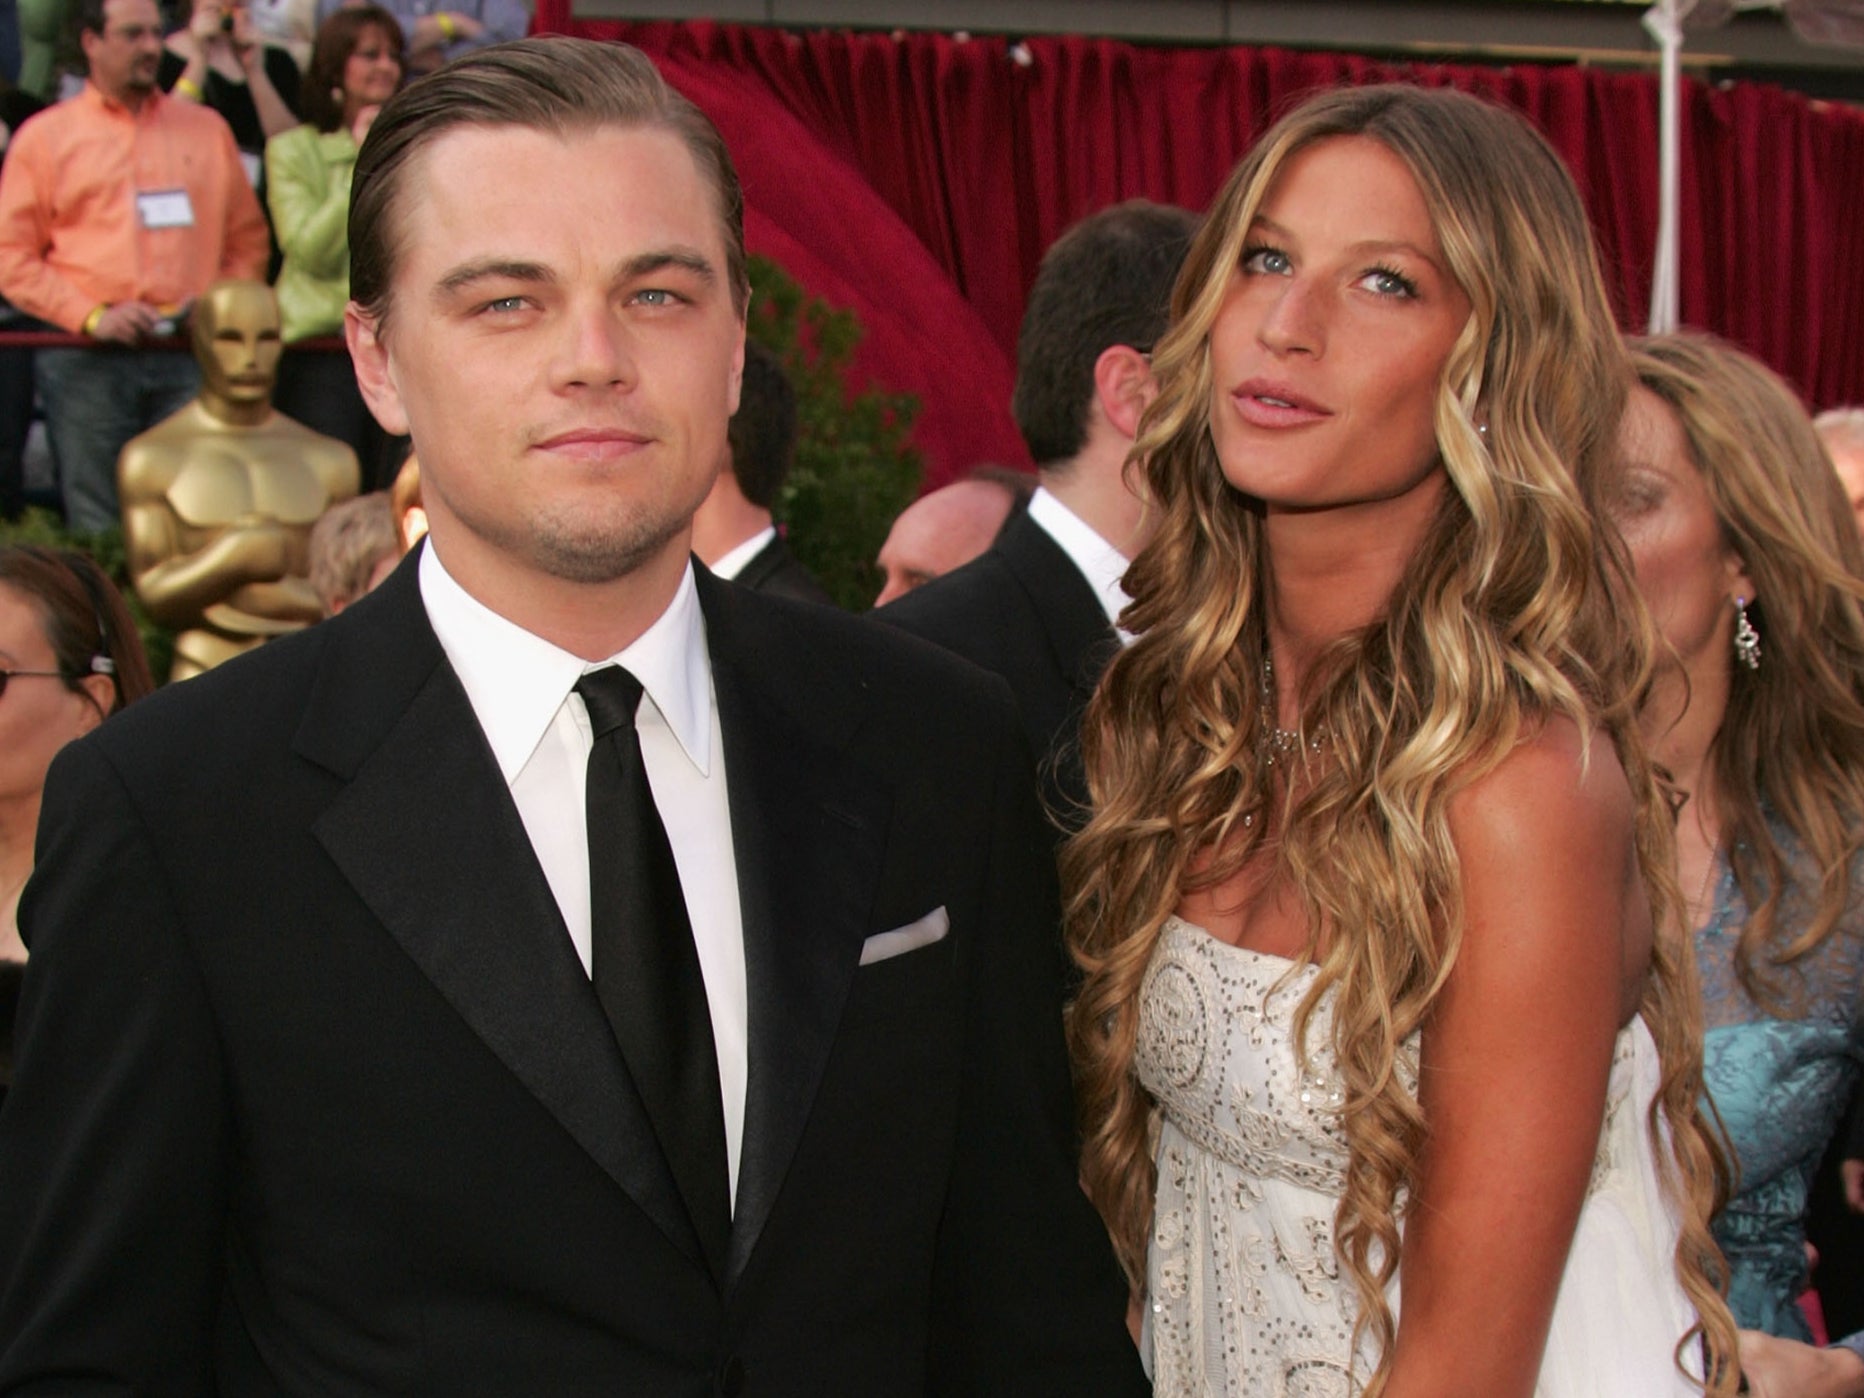 Leonardo DiCaprio and Gisele Bundchen arrives at the 77th Annual Academy Awards at the Kodak Theater on February 27, 2005